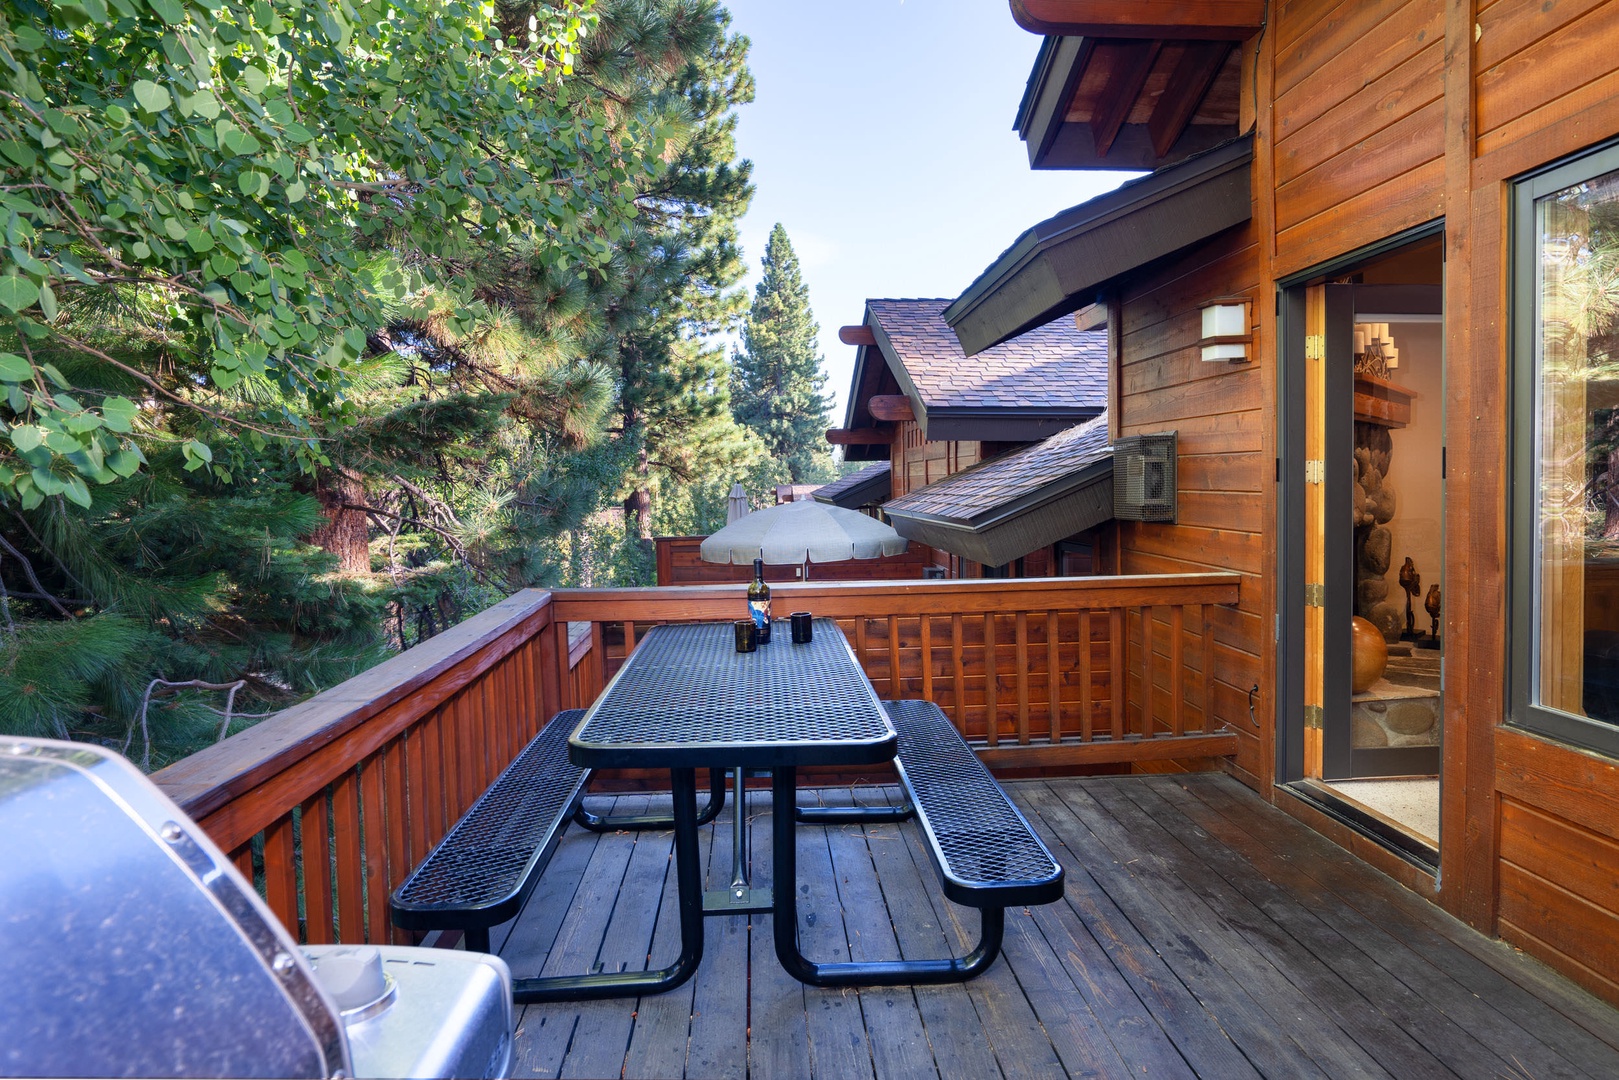 Adorable balcony with gas BBQ grill and seating